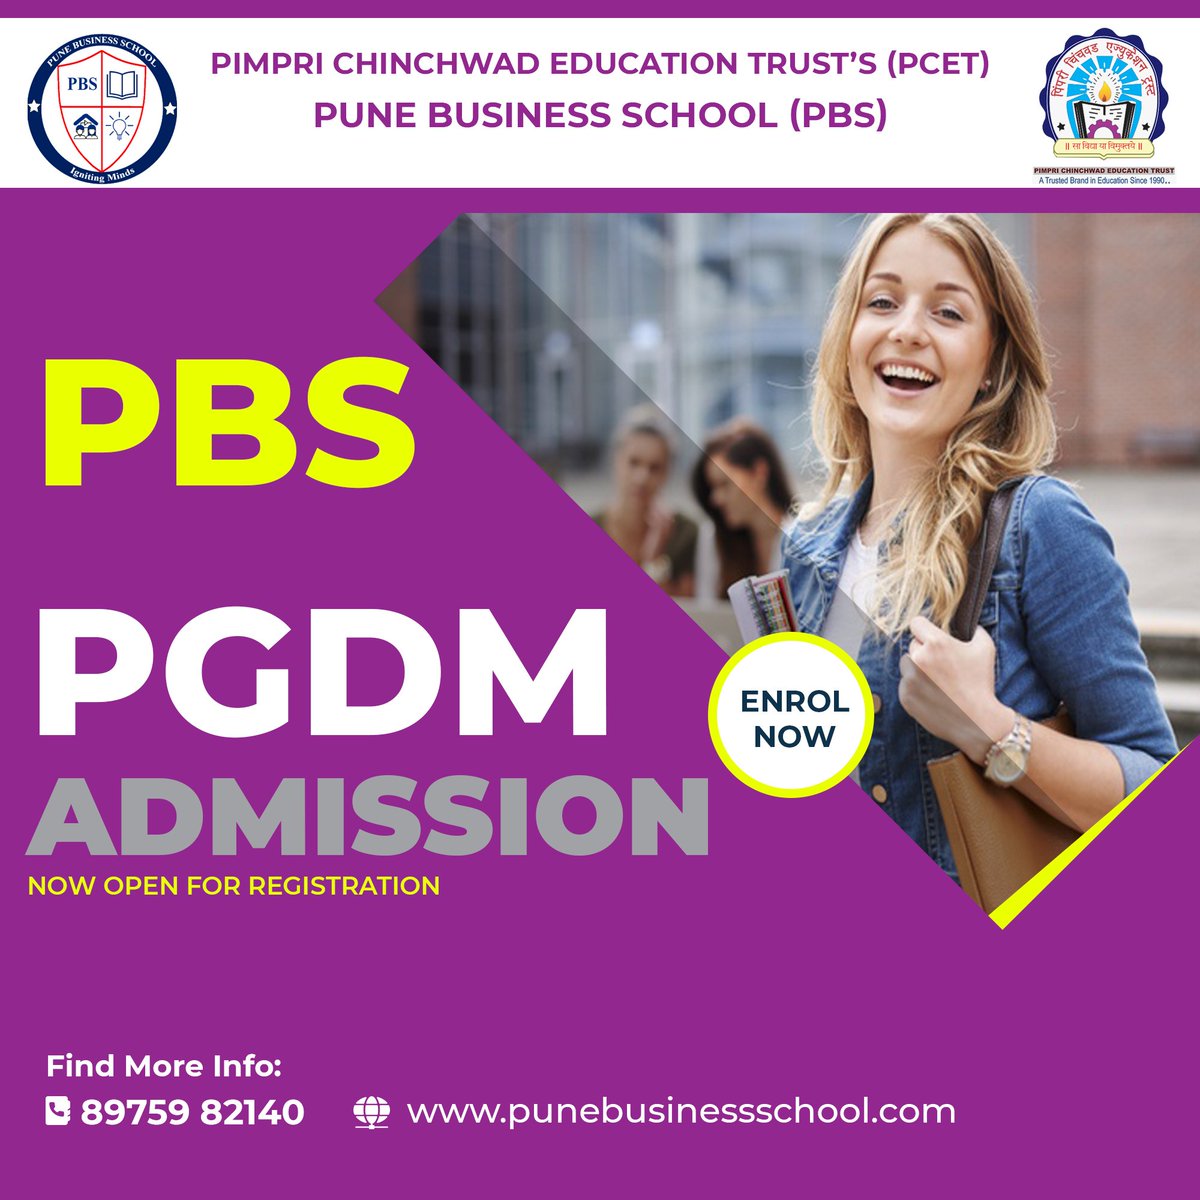 India's best place for Post Graduation Diploma in Management 

#PGDM #Suga #ReleaseArnabNow
Call us at 89759 82140